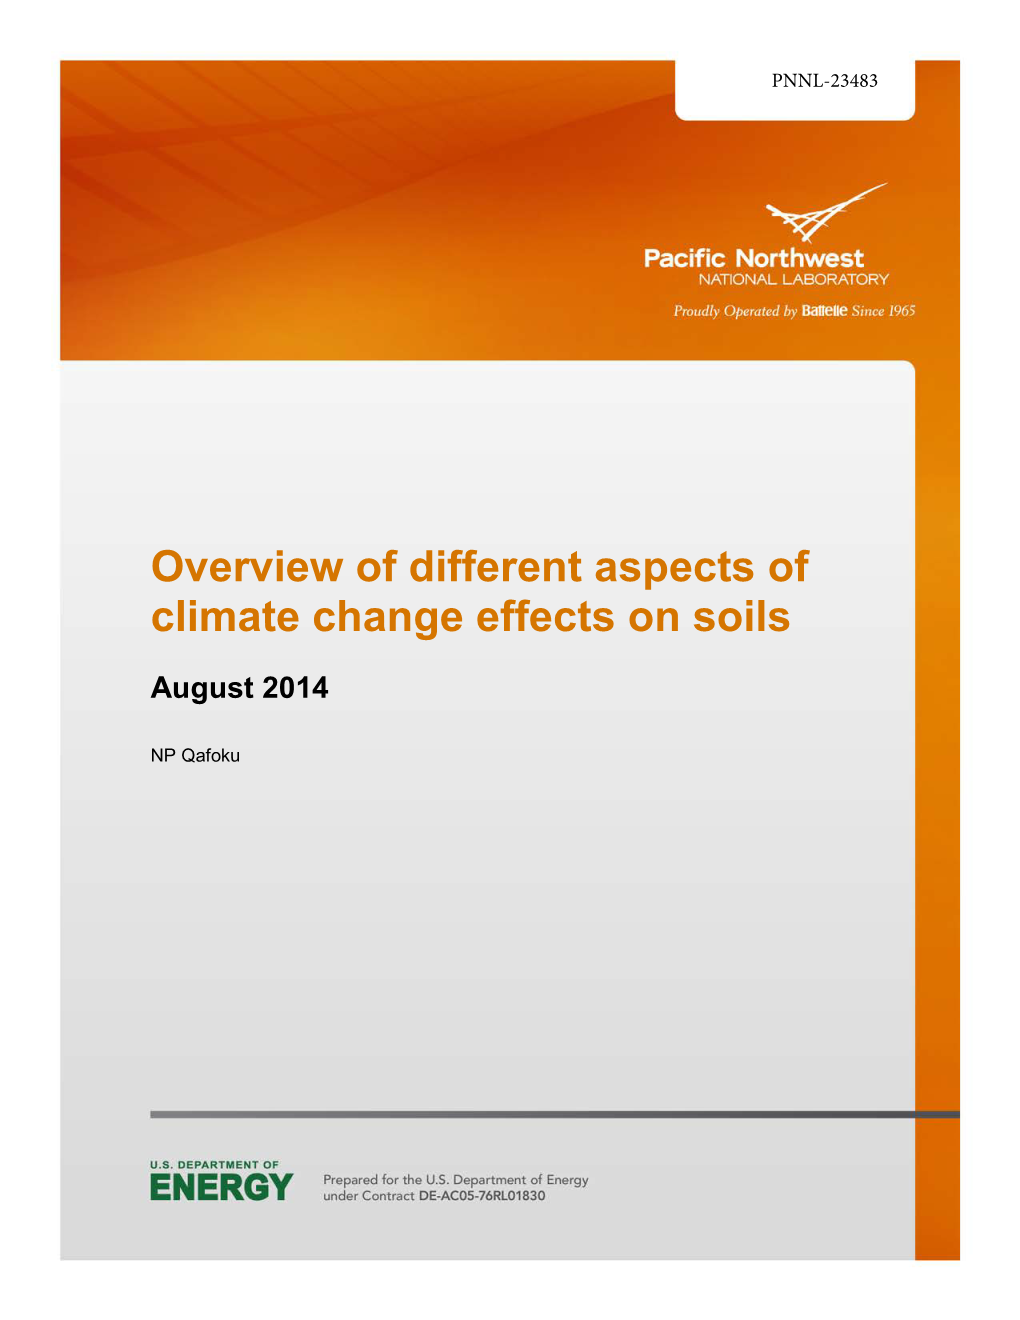 Overview of Different Aspects of Climate Change Effects on Soils August 2014